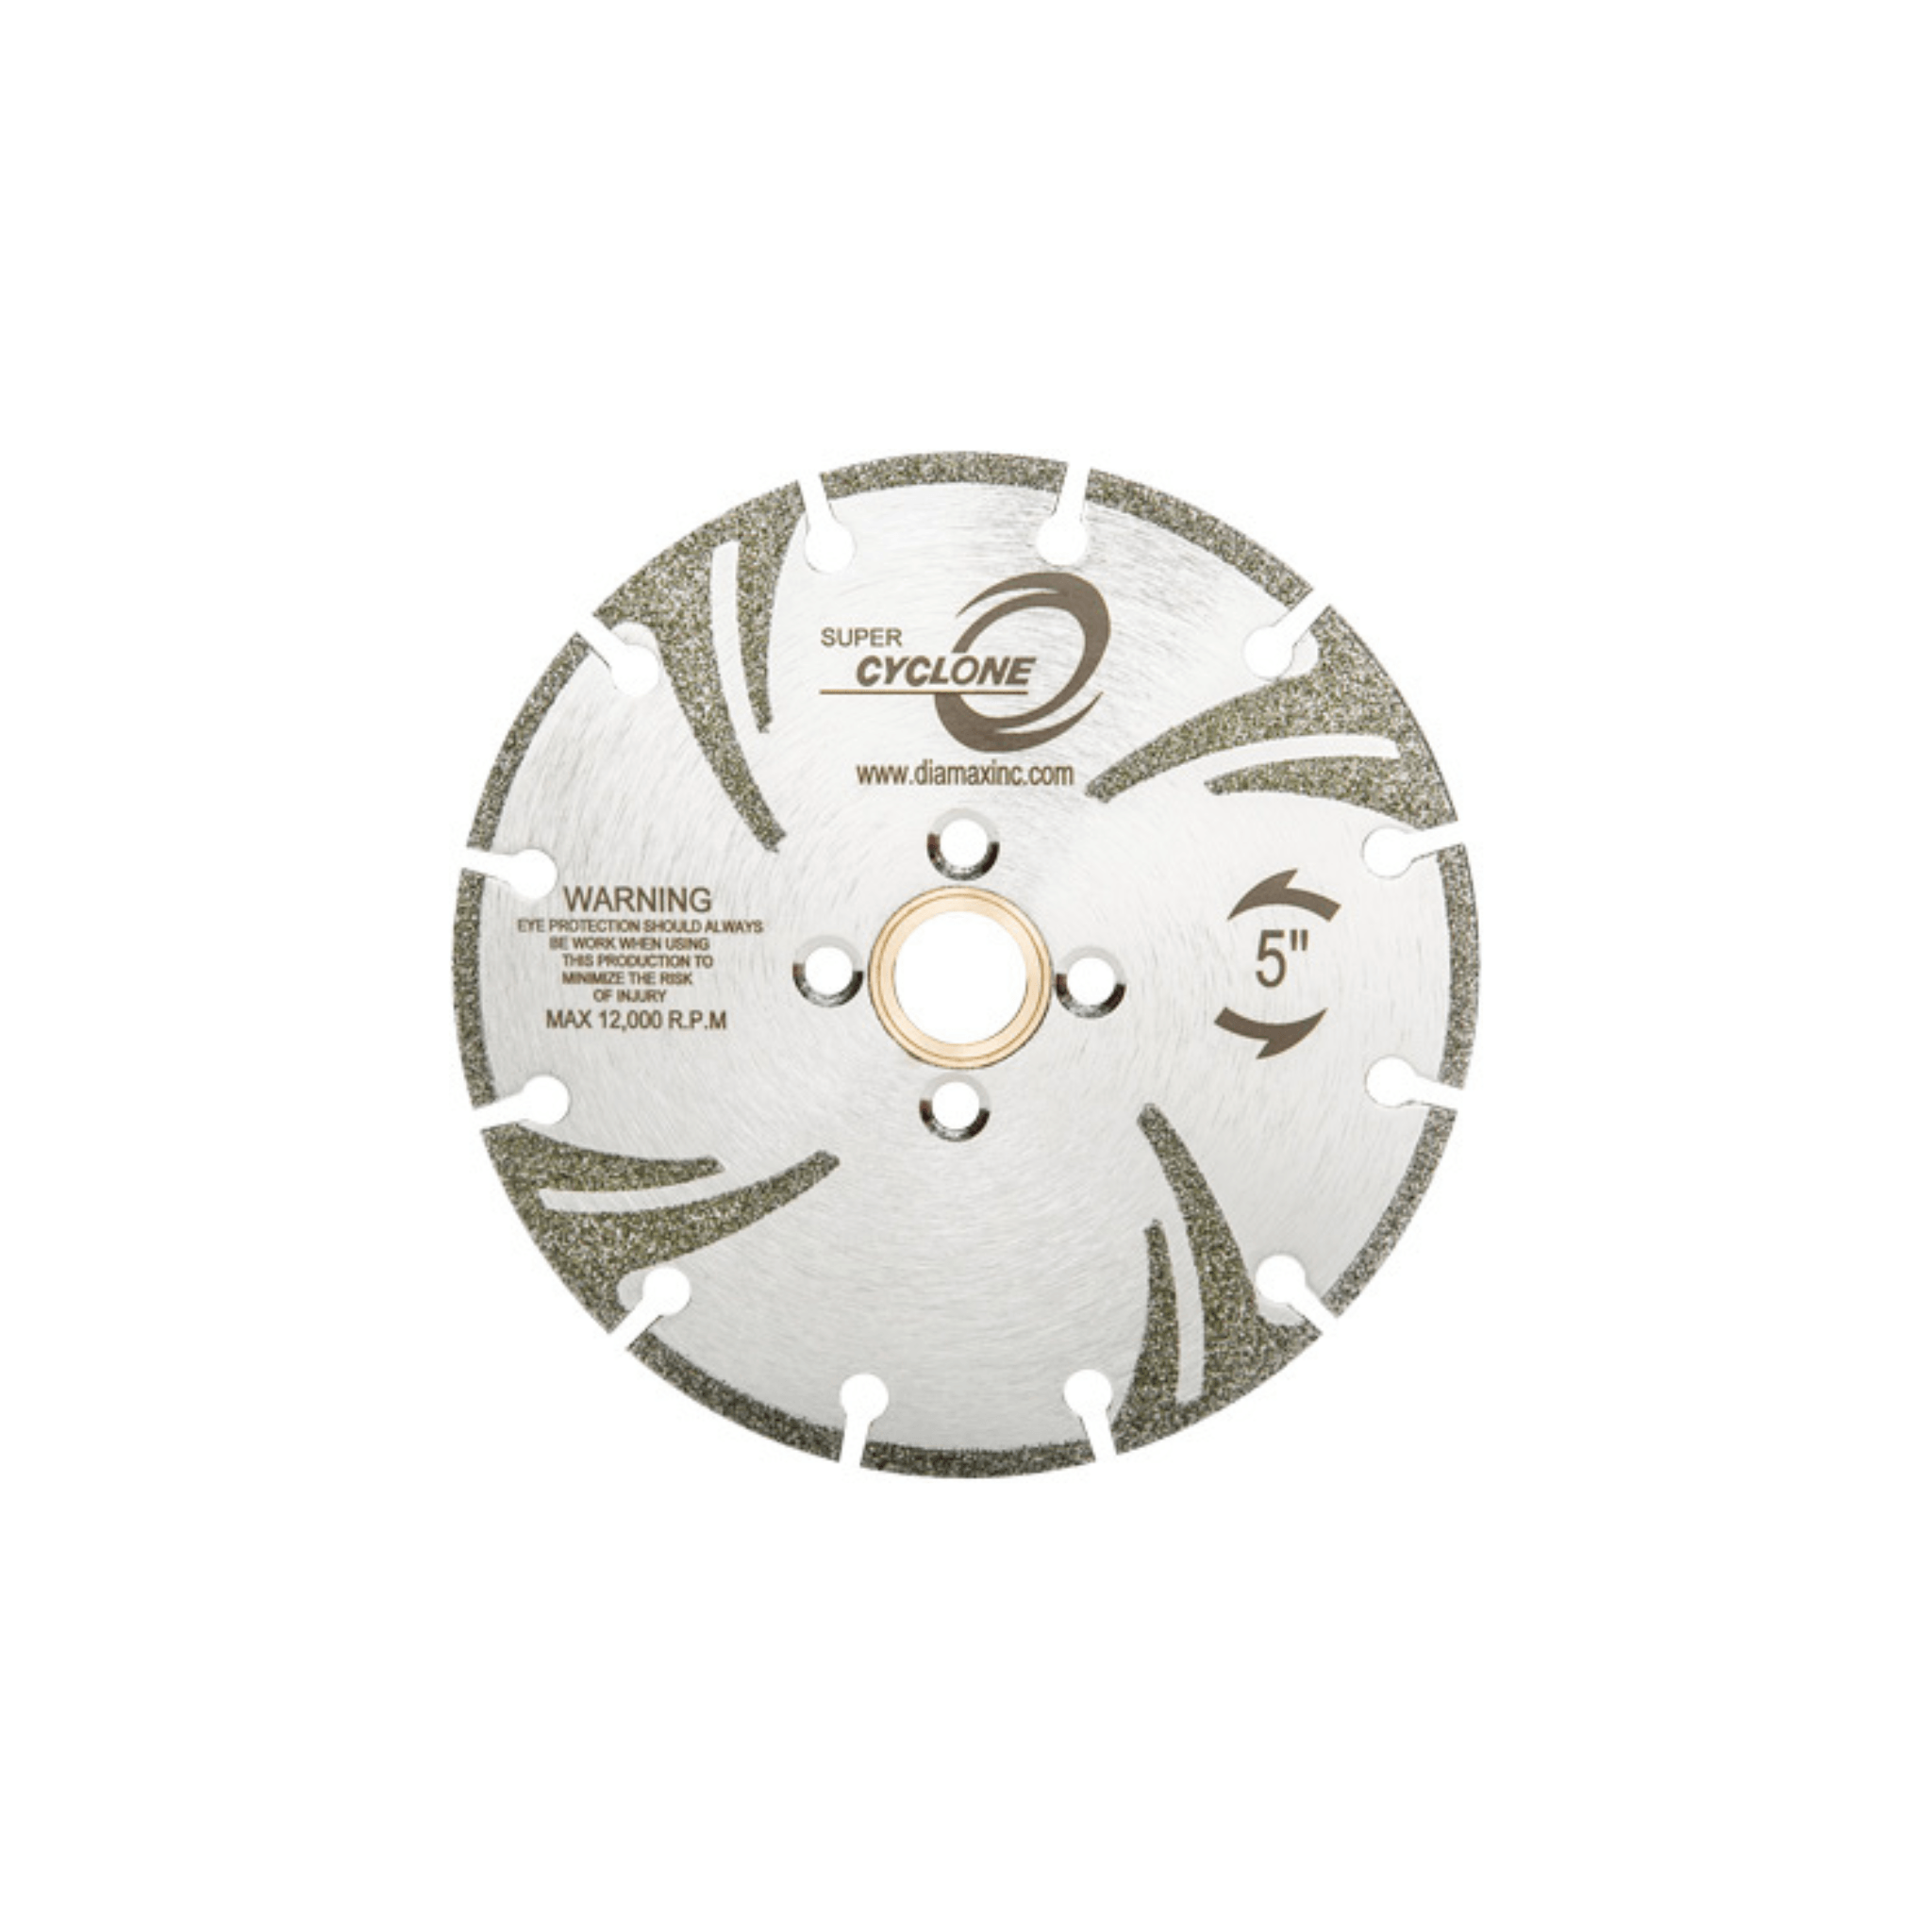 Cyclone Super Electroplated Blade 5" - Direct Stone Tool Supply, Inc